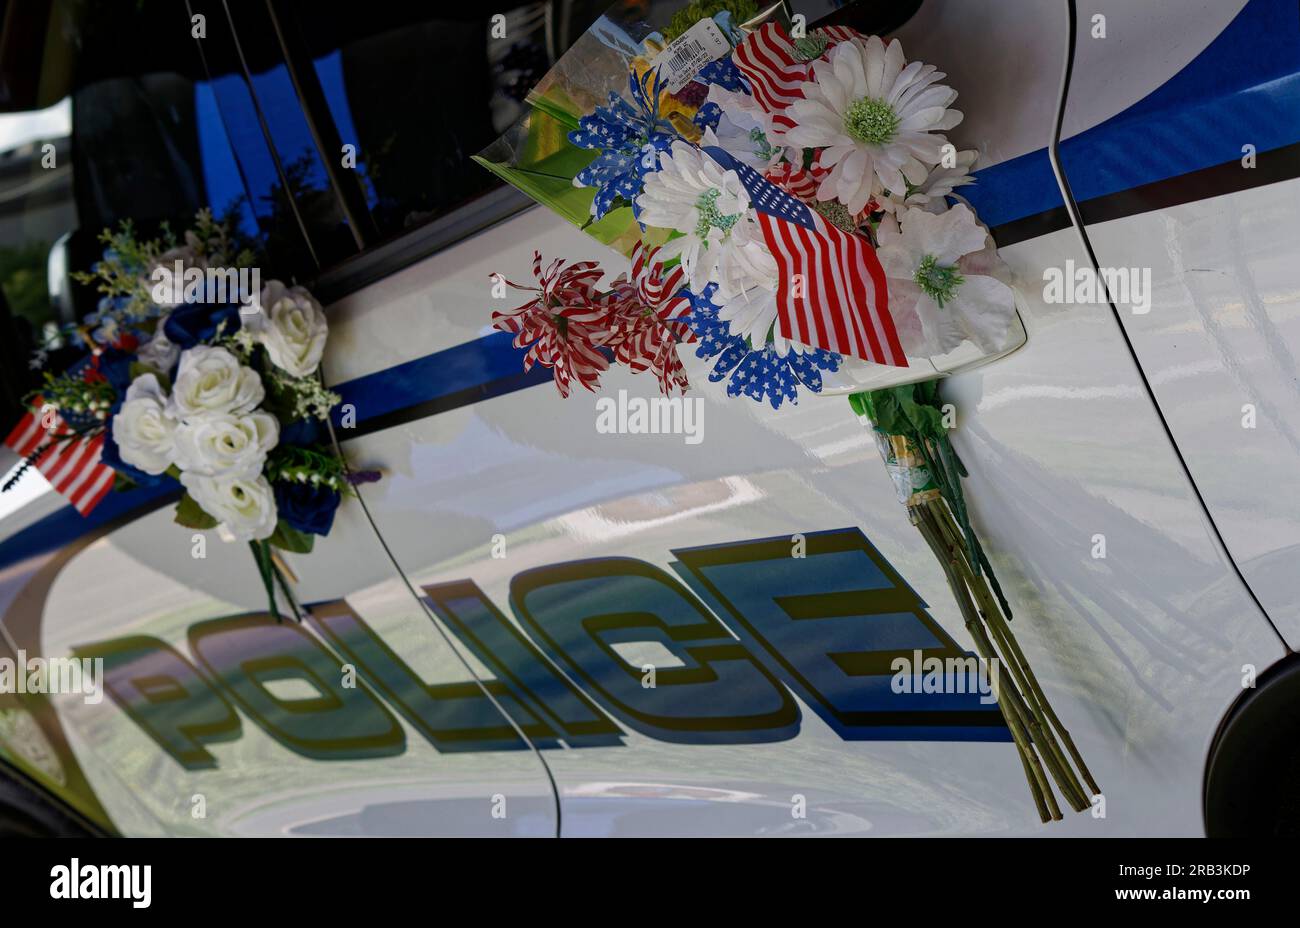 Memorial flower arrangements adorn the driver's side doors of the Dodge Durango patrol vehicle of Tell City Police Department Sgt. Heather J. Glenn on Thursday, July 6, 2023 near city hall in Tell City, Troy Township, Perry County, IN, USA. Glenn, 47, was shot and killed July 3 while trying to arrest a domestic violence suspect at a local hospital, becoming the first line-of-duty death in the Tell City Police Department's nearly 165-year history and second Indiana police officer to be killed in the line of duty in less than a week. (Apex MediaWire Photo by Billy Suratt) Stock Photo